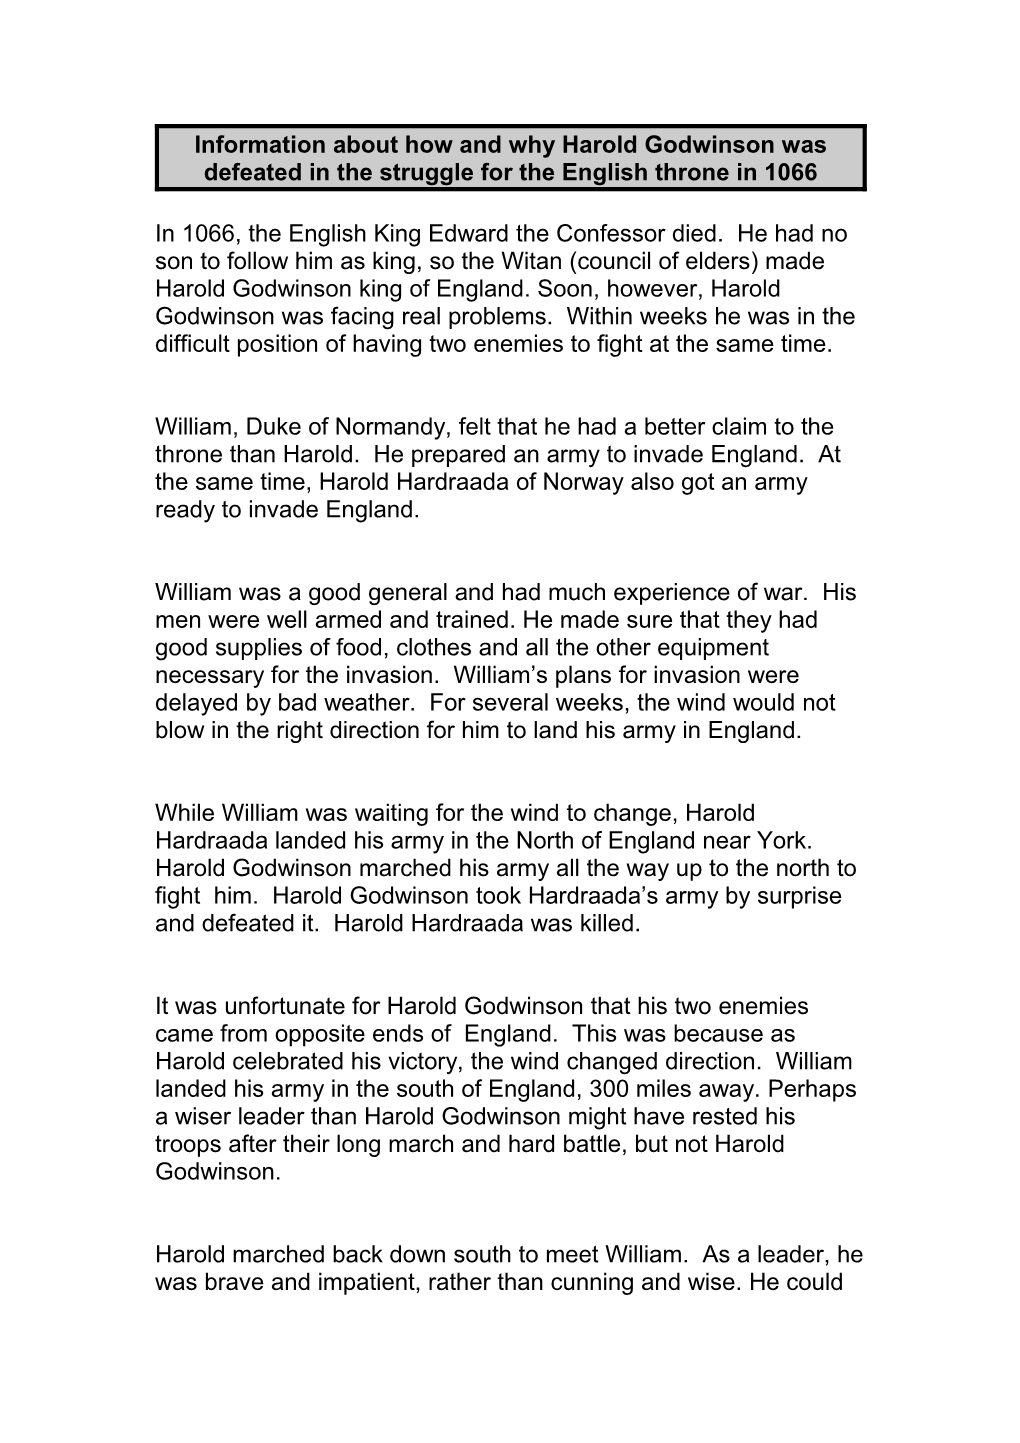 Information About How and Why Harold Godwinson Was Defeated in the Struggle for the English